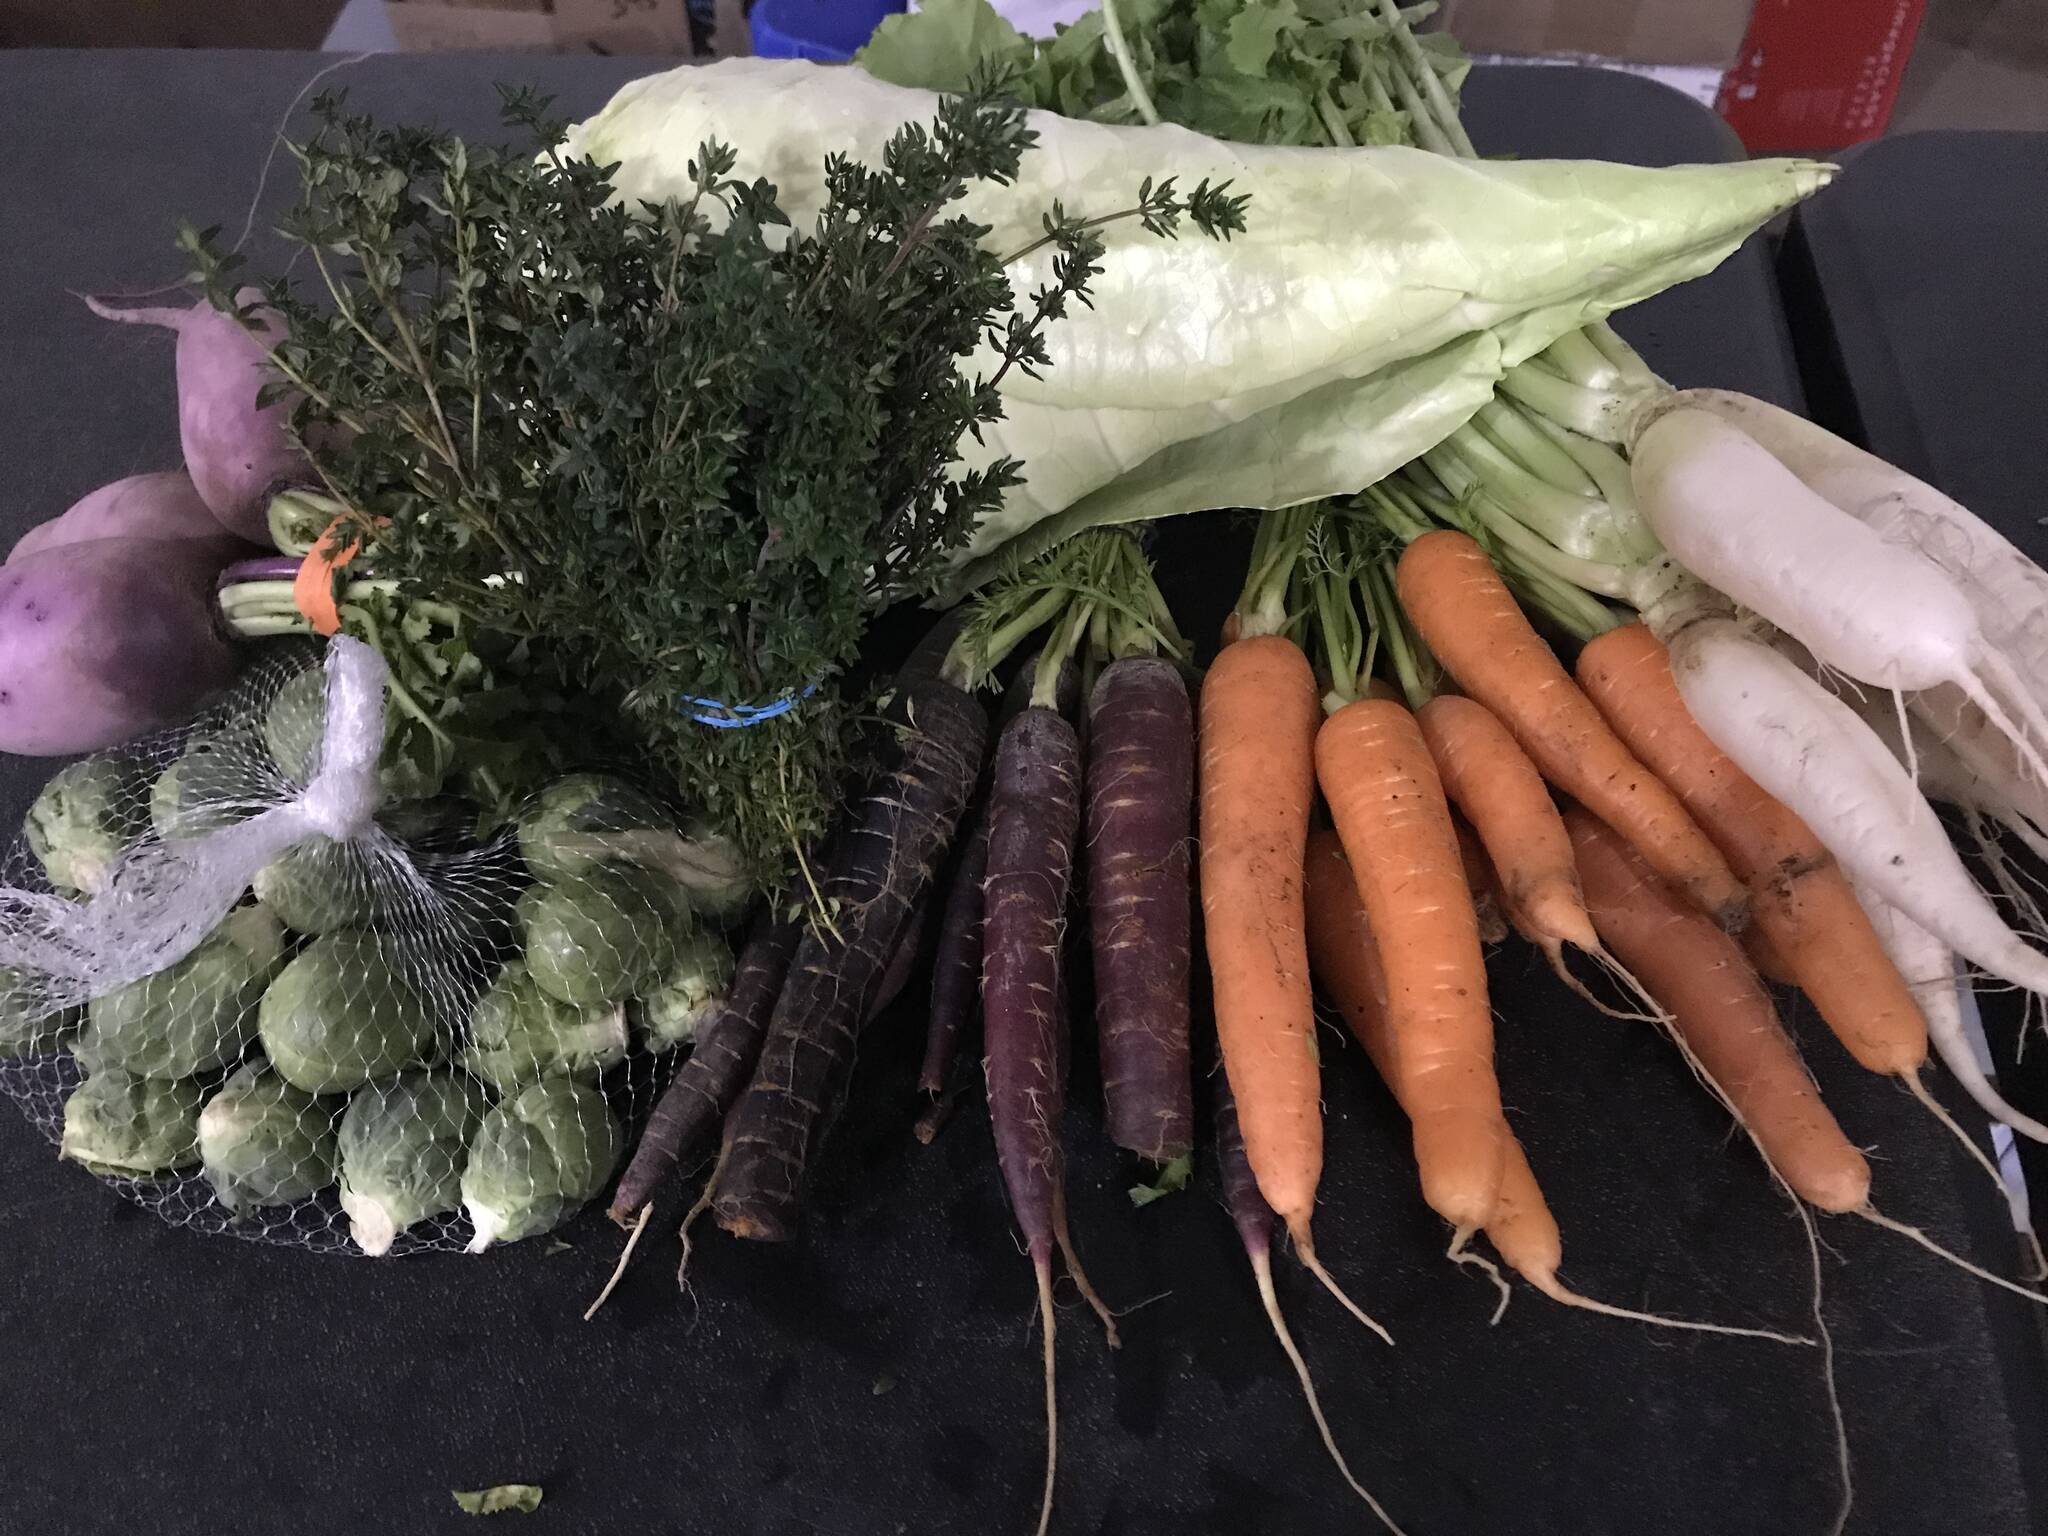 Photo provided
The Whidbey Island Grown Cooperative helps connect island residents with products from local farms.